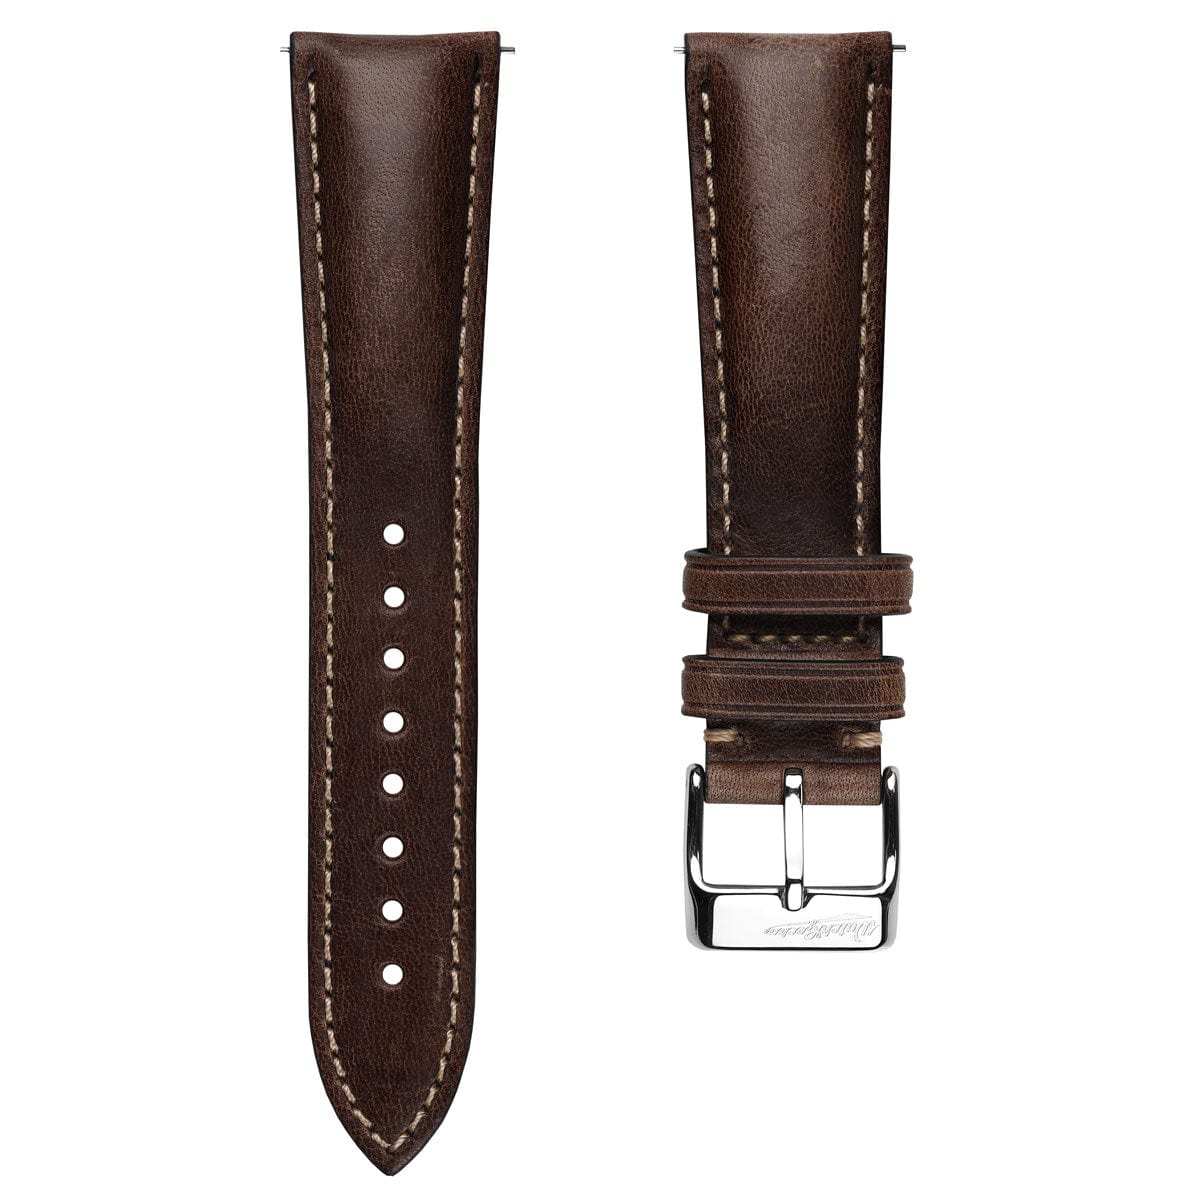 Vintage Highley Genuine Leather Watch Strap - Chocolate Brown